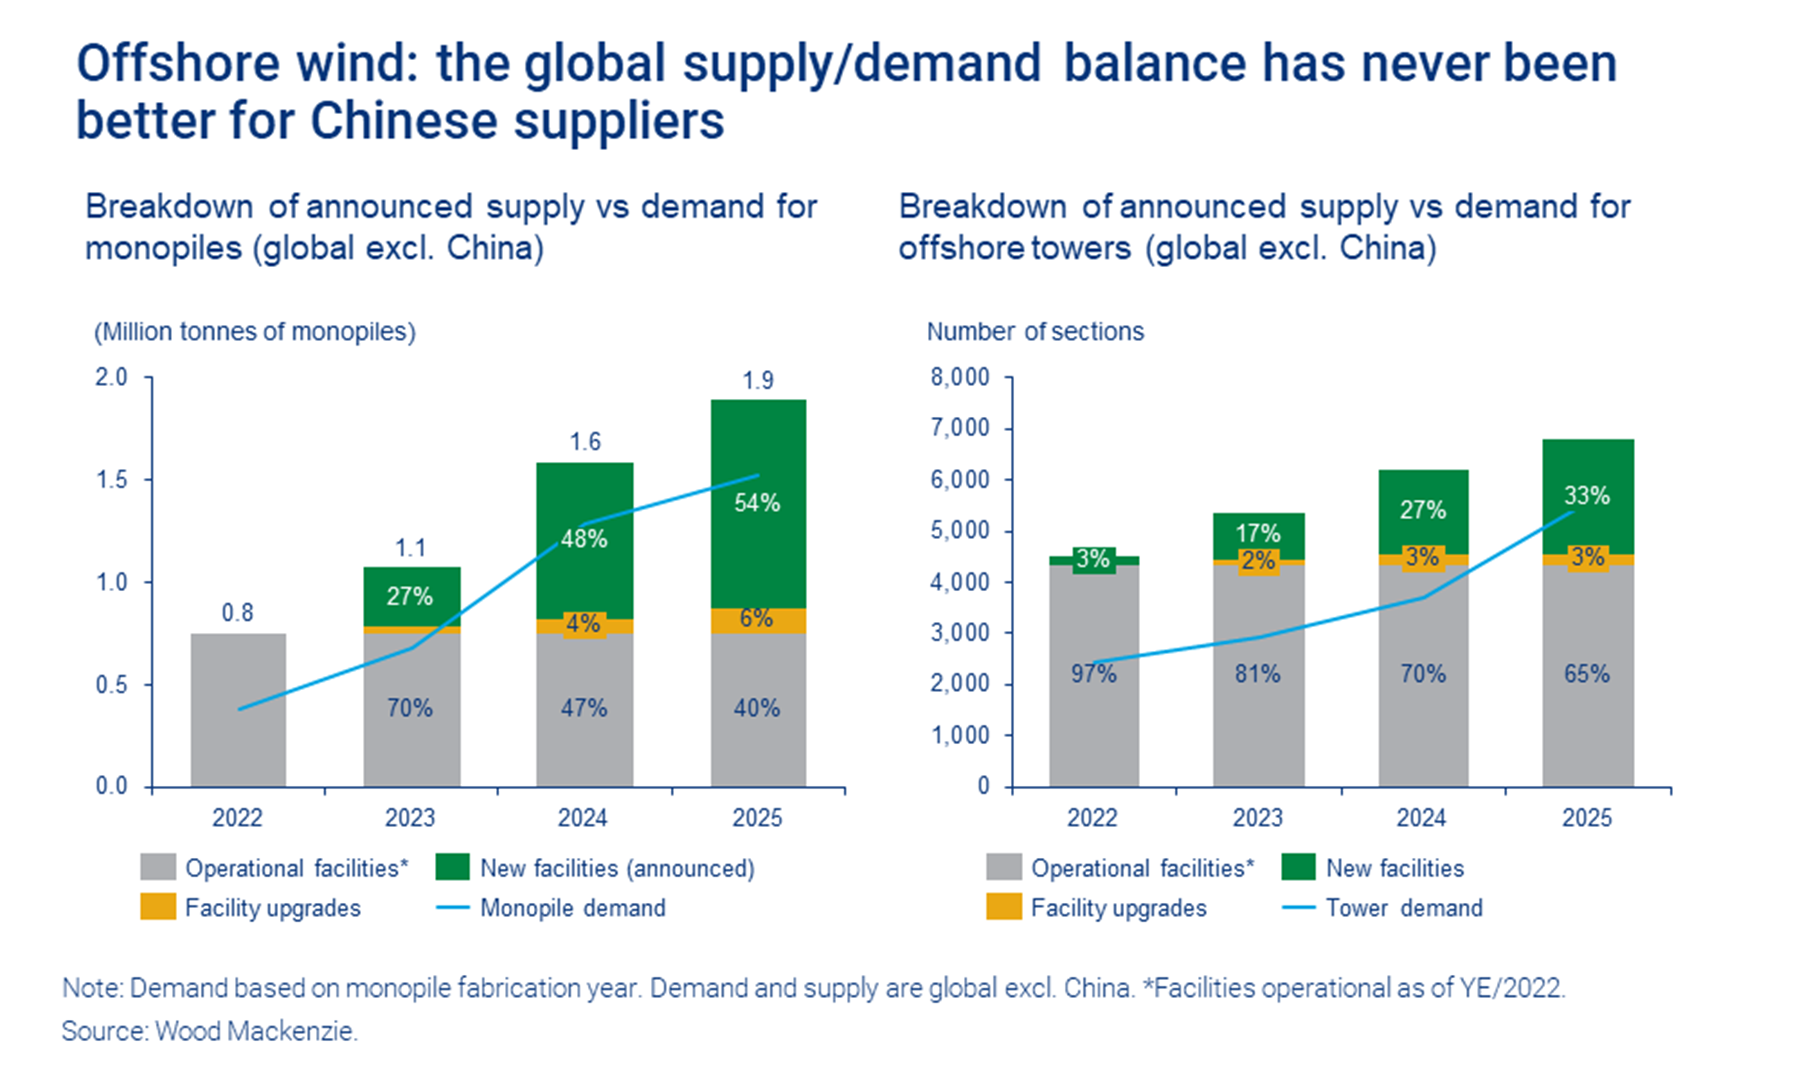 Charts show that the global supply/demand balance has never been better for Chinese suppliers